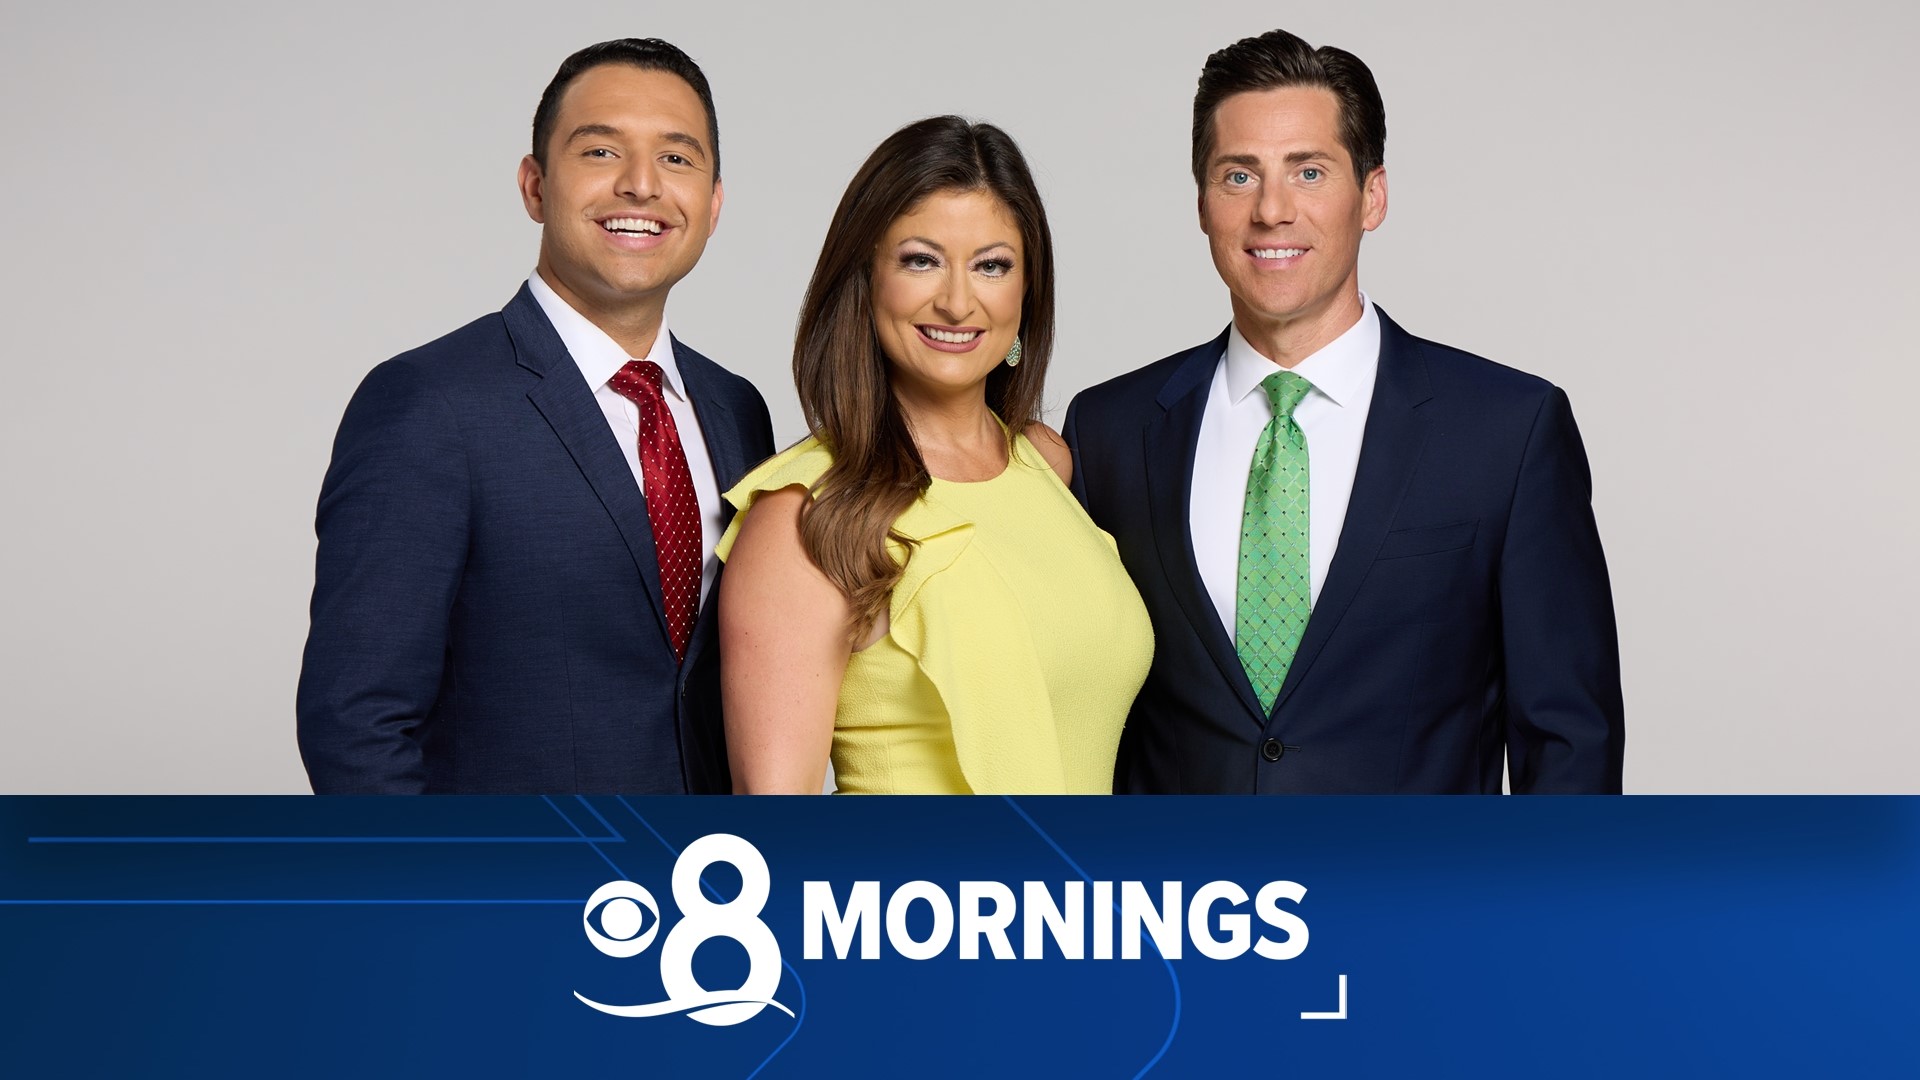 CBS 8 News gets you up to speed with what is happening today. Plus get up-to-the-minute weather and discover new ways to enjoy San Diego.